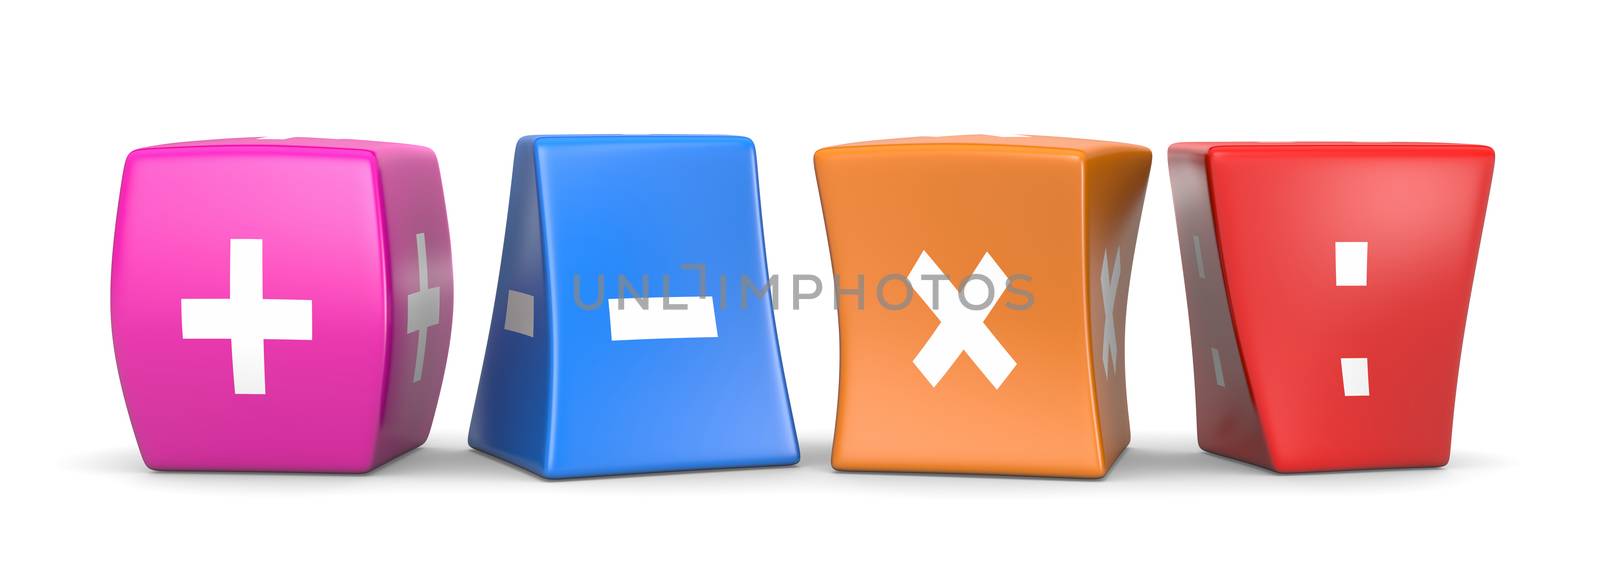 Four Math Operators White Symbols on Colorful Deformed Funny Cubes 3D Illustration on White Background